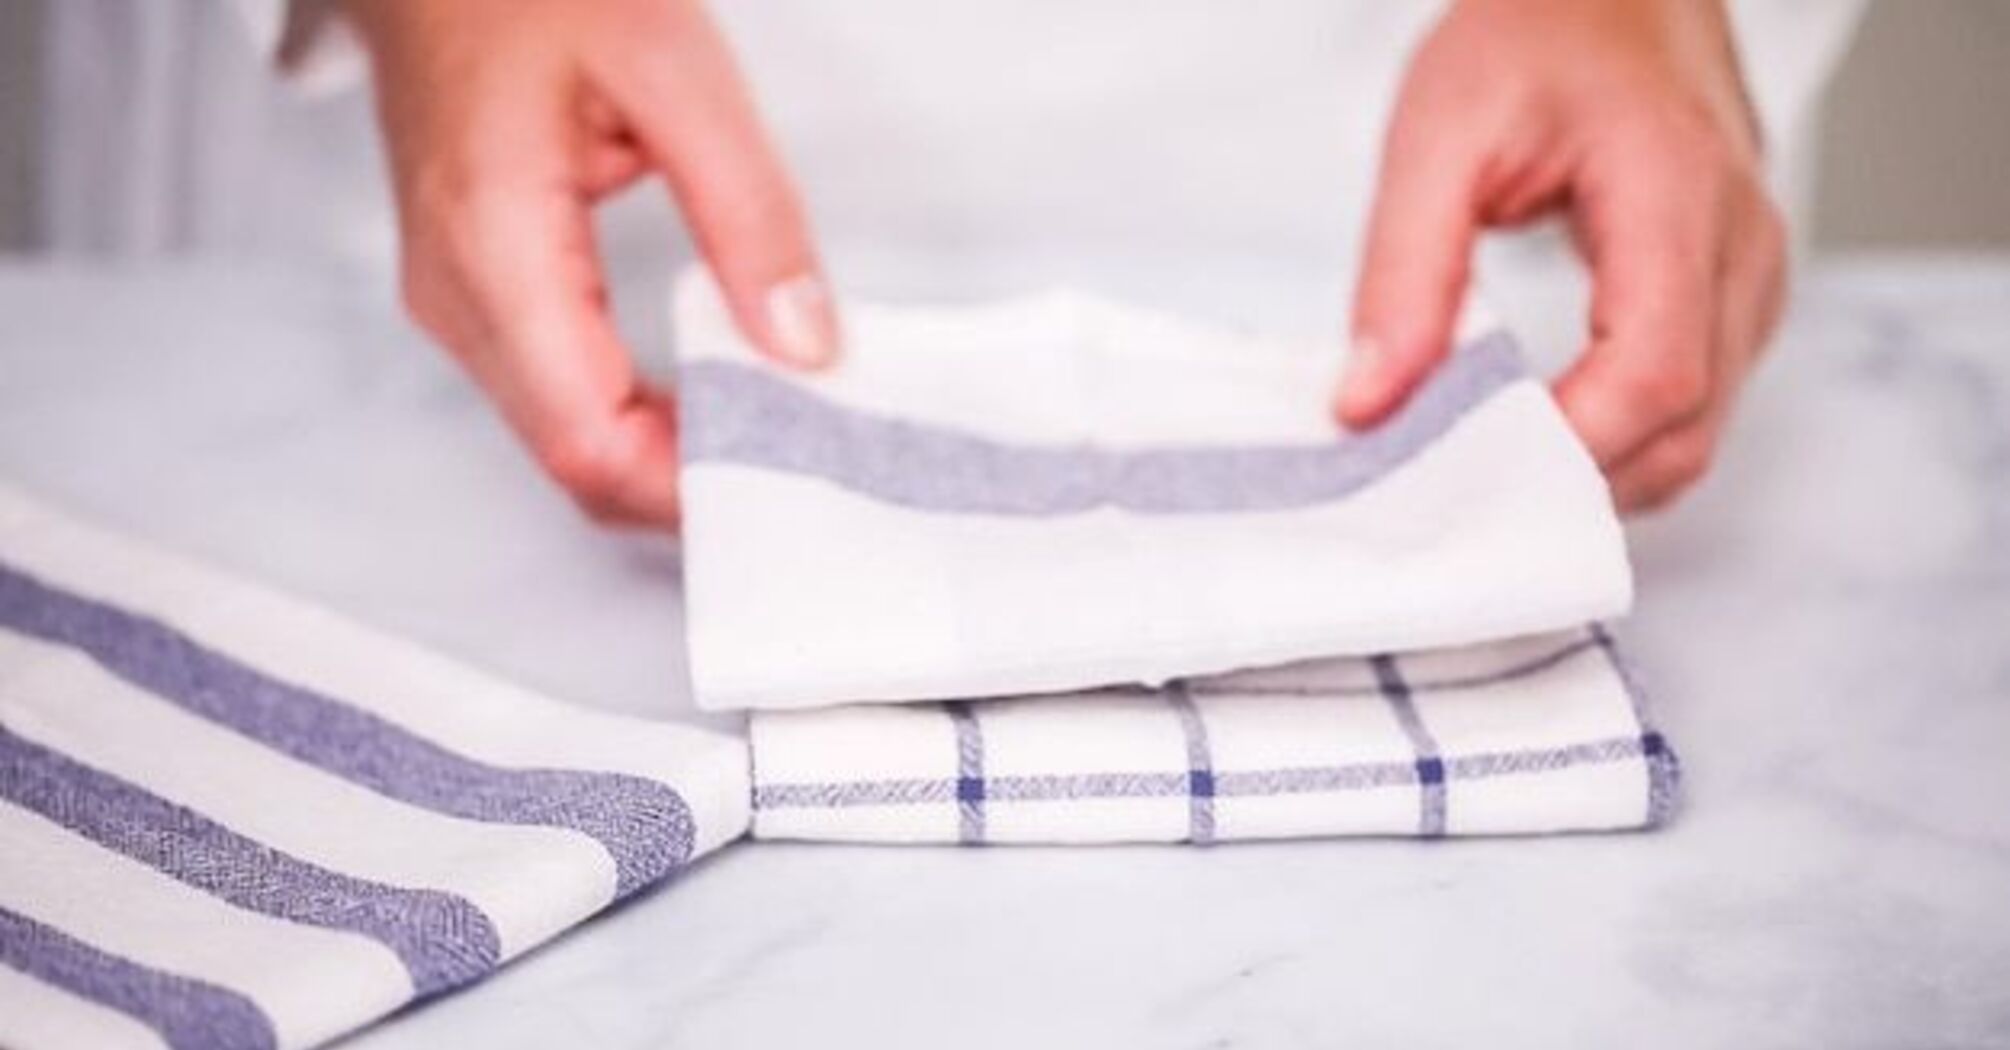 How to get rid of stubborn stains on towels: Effective remedies